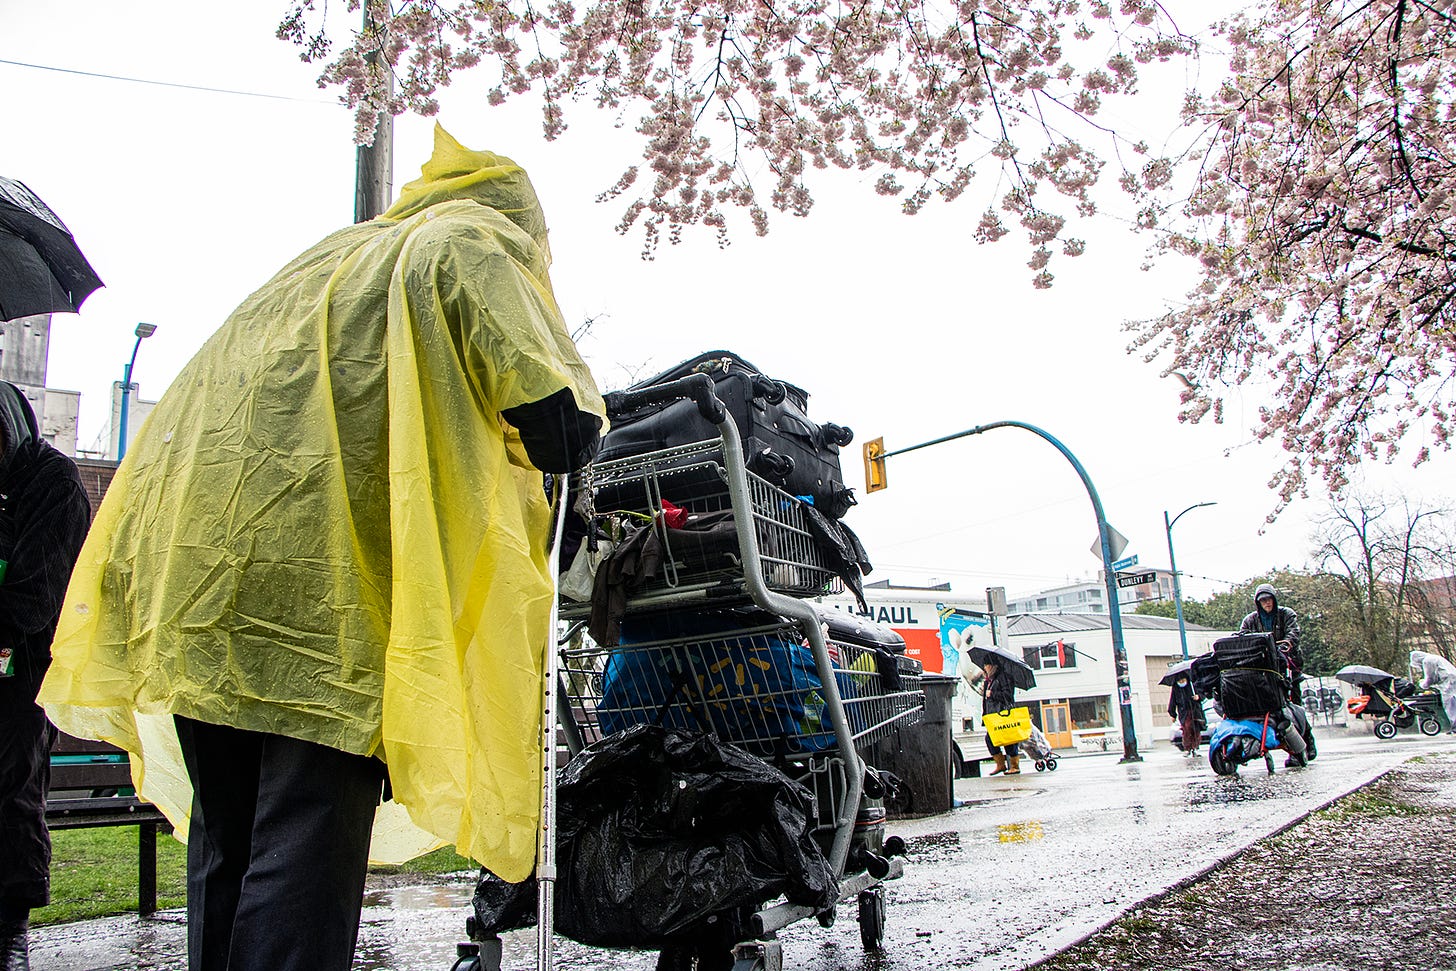 Gurdeep Singh is seen hunched over his shopping cart. In his right hand, he holds a cane, while his left hand supports him by holding onto the shopping cart handle (this is unseen, but implied by his positioning). He's wearing a thin, yellow, plastic rain poncho with his hood up. Above him is a flowering tree. He's on a pathway, and another person is walking towards him with a cart.